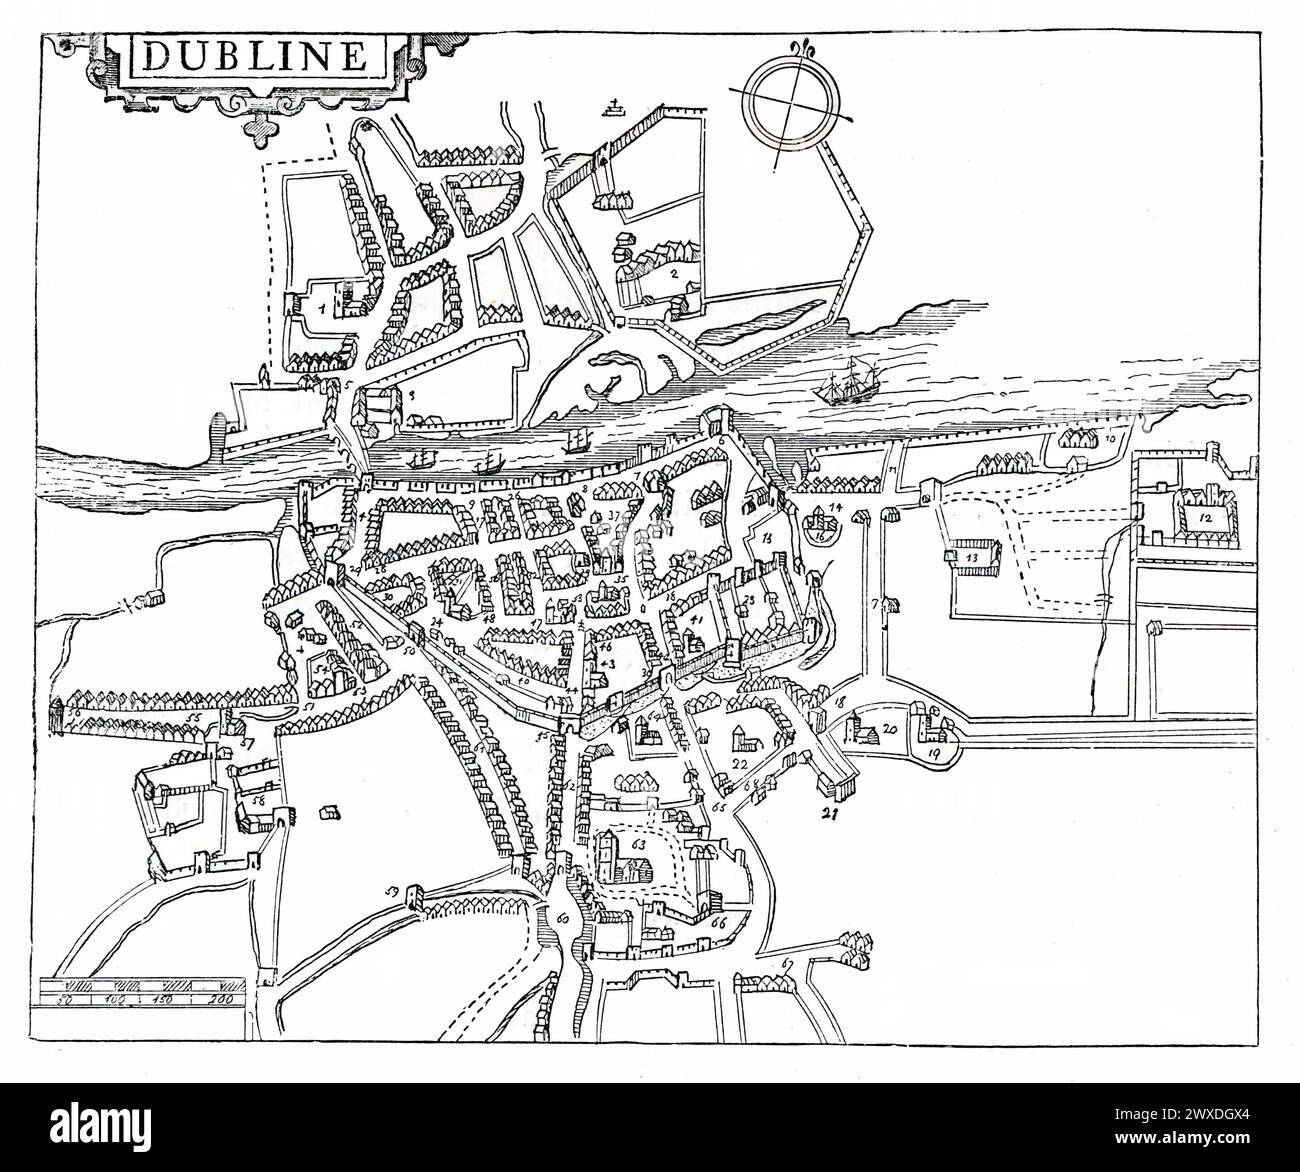 Map of Dublin, AD 1610. Black and White Illustration from the 'Our Own Country' published by Cassell, Petter, Galpin & Co. Late 19th century. Stock Photo